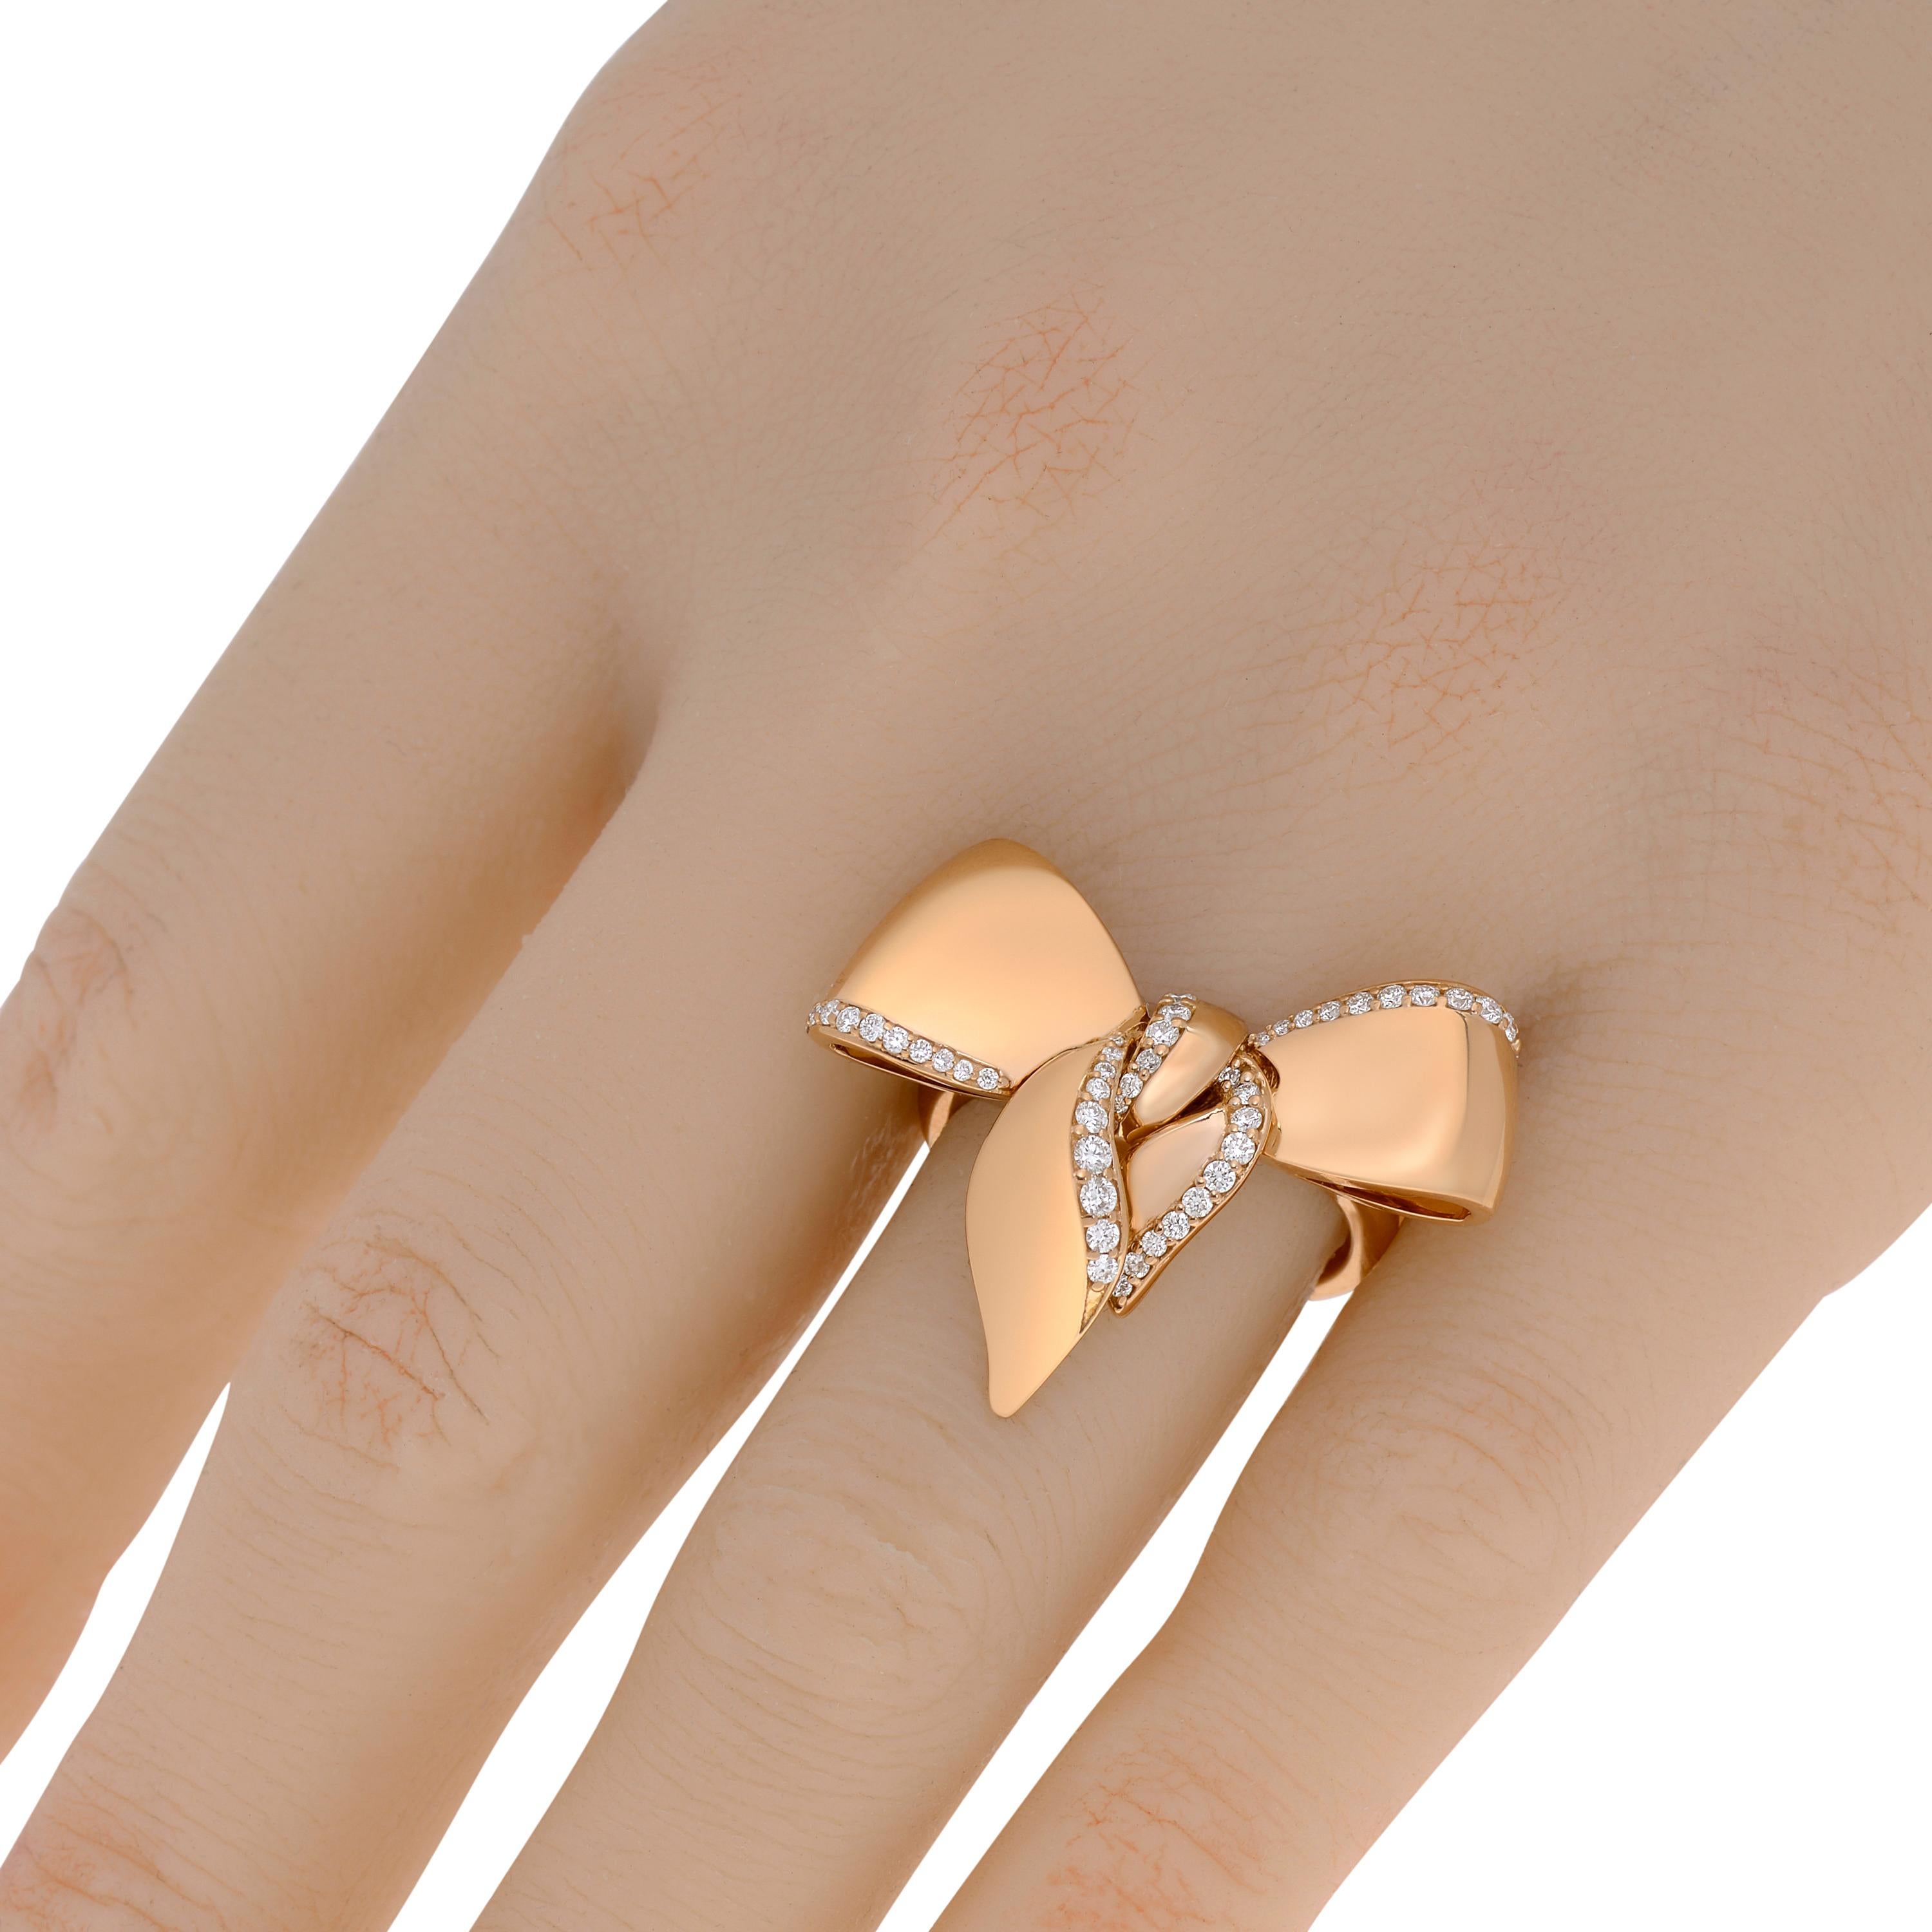 Damiani ring features 0.33ct. tw. diamonds bordering a polished bow in 18K rose gold. The ring size is 7.25 (55.1). The decoration size is 1 1/8